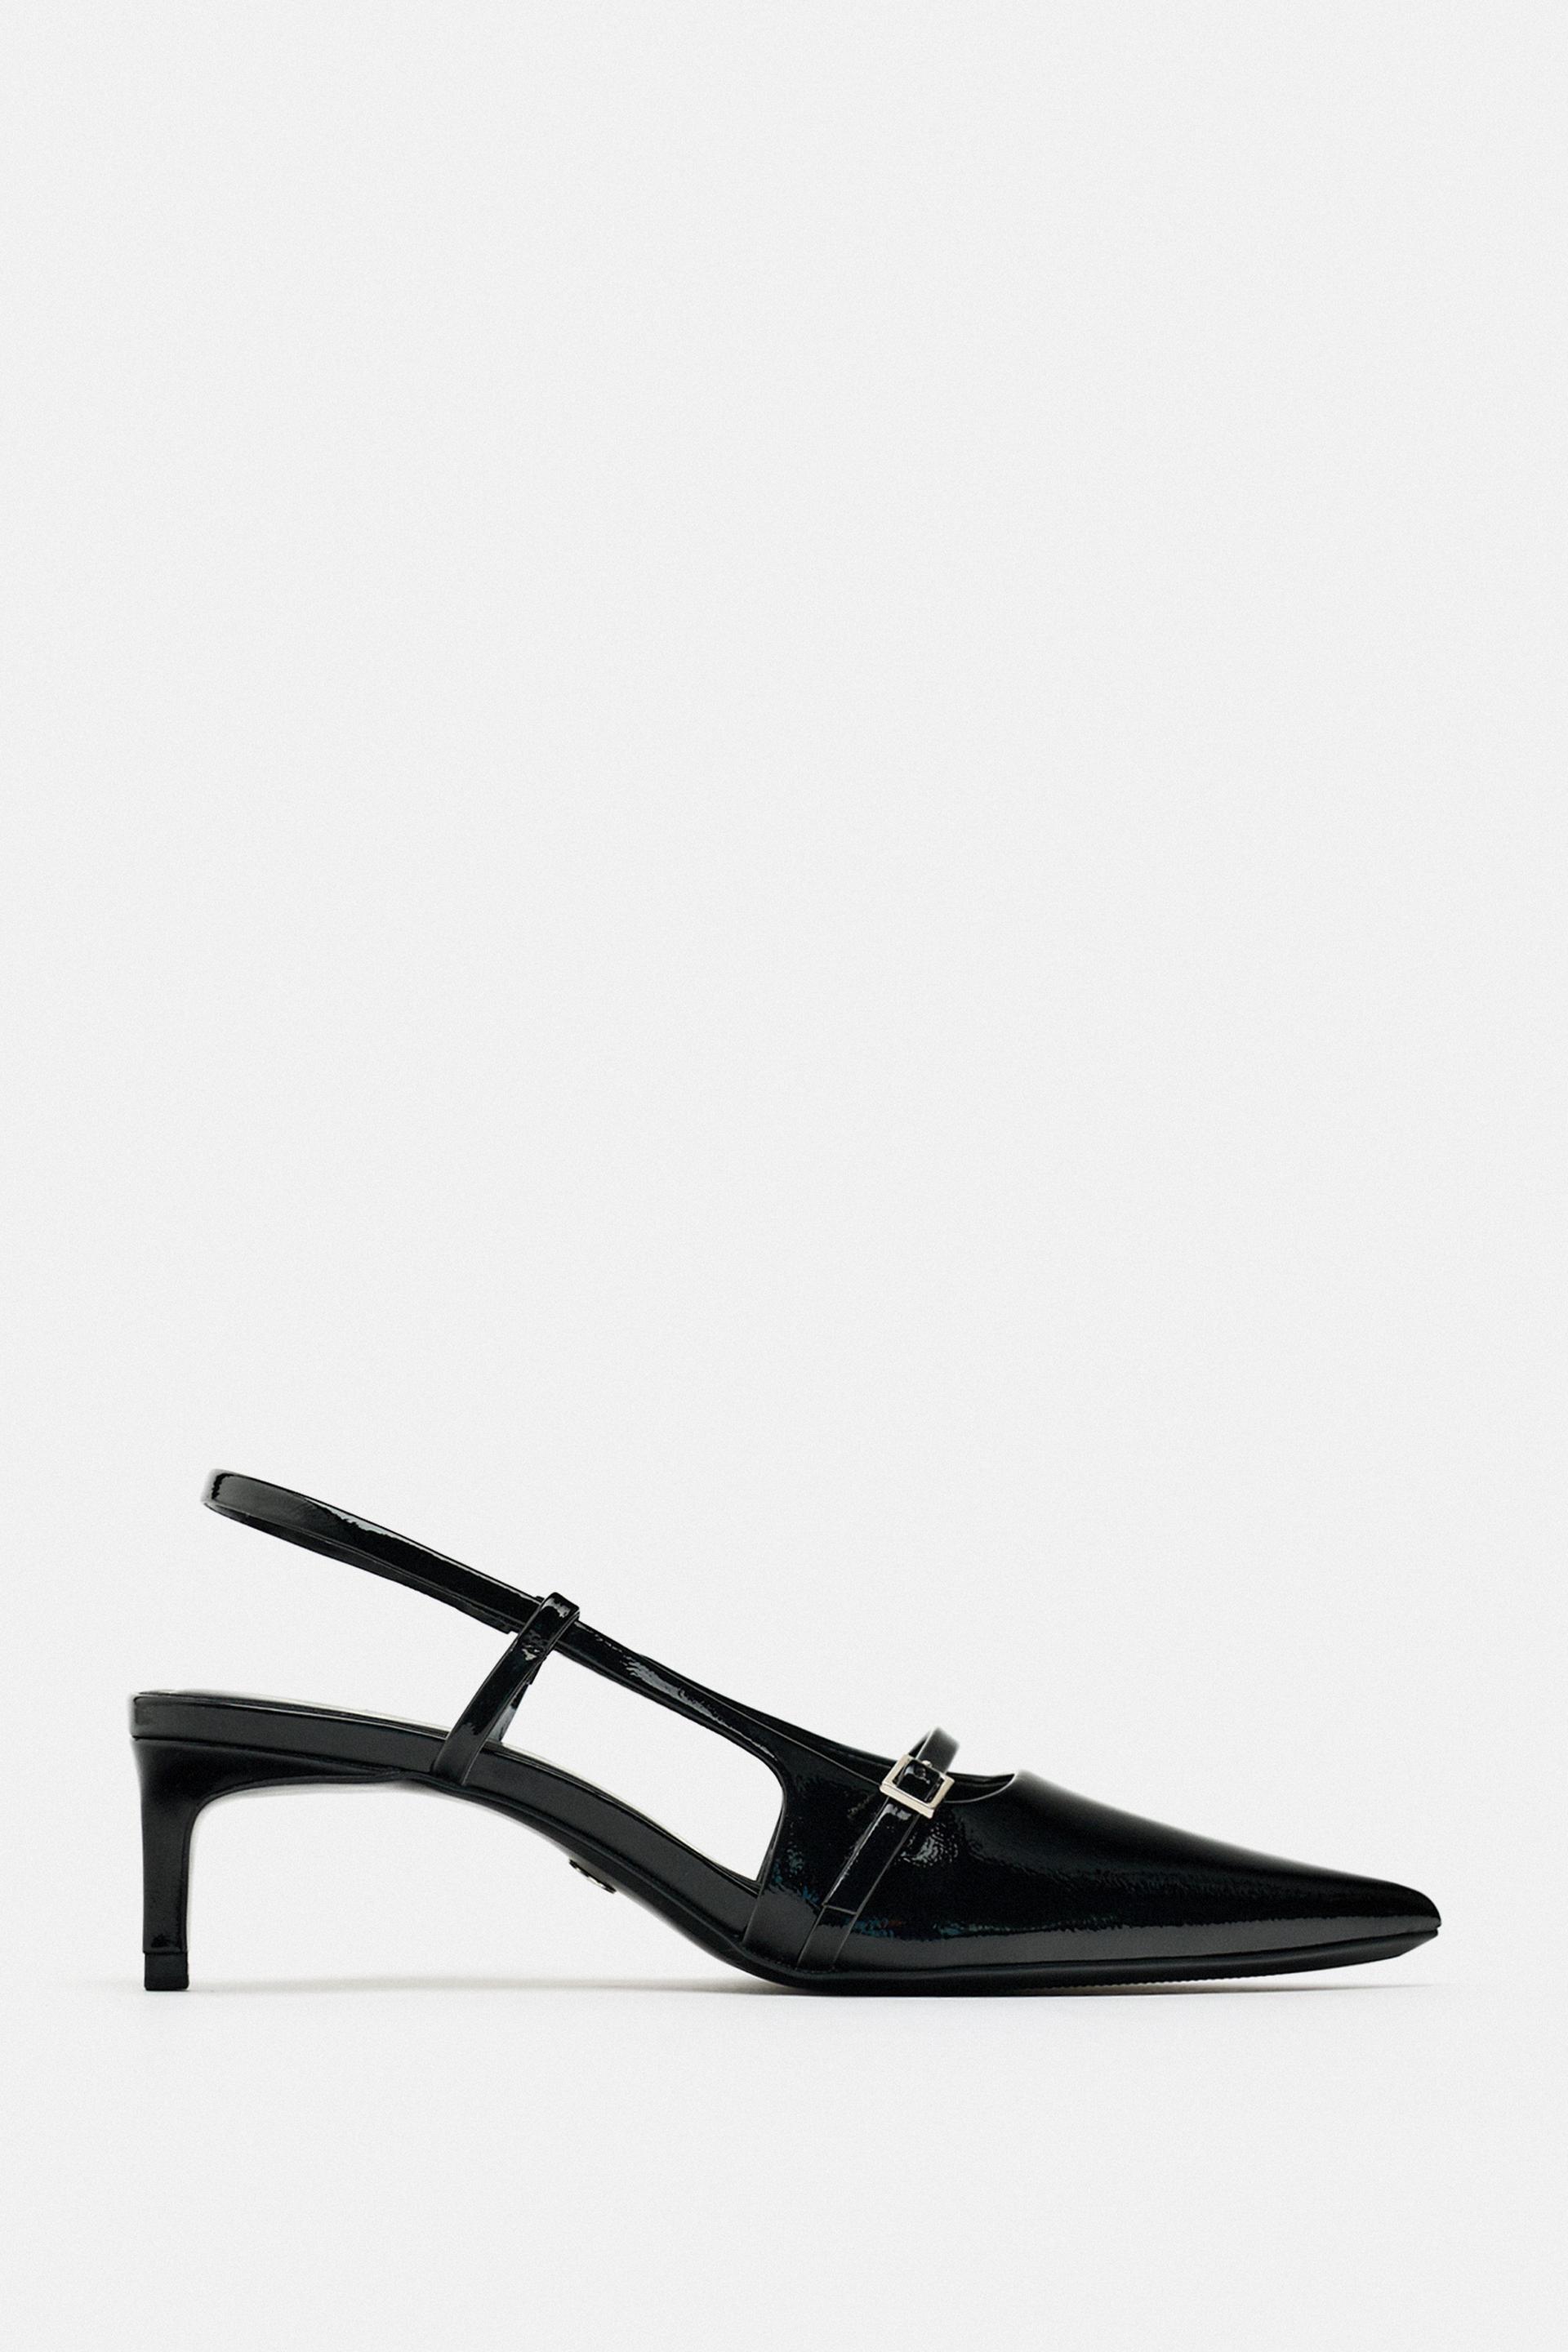 Best thing to buy this month: Slingback shoes